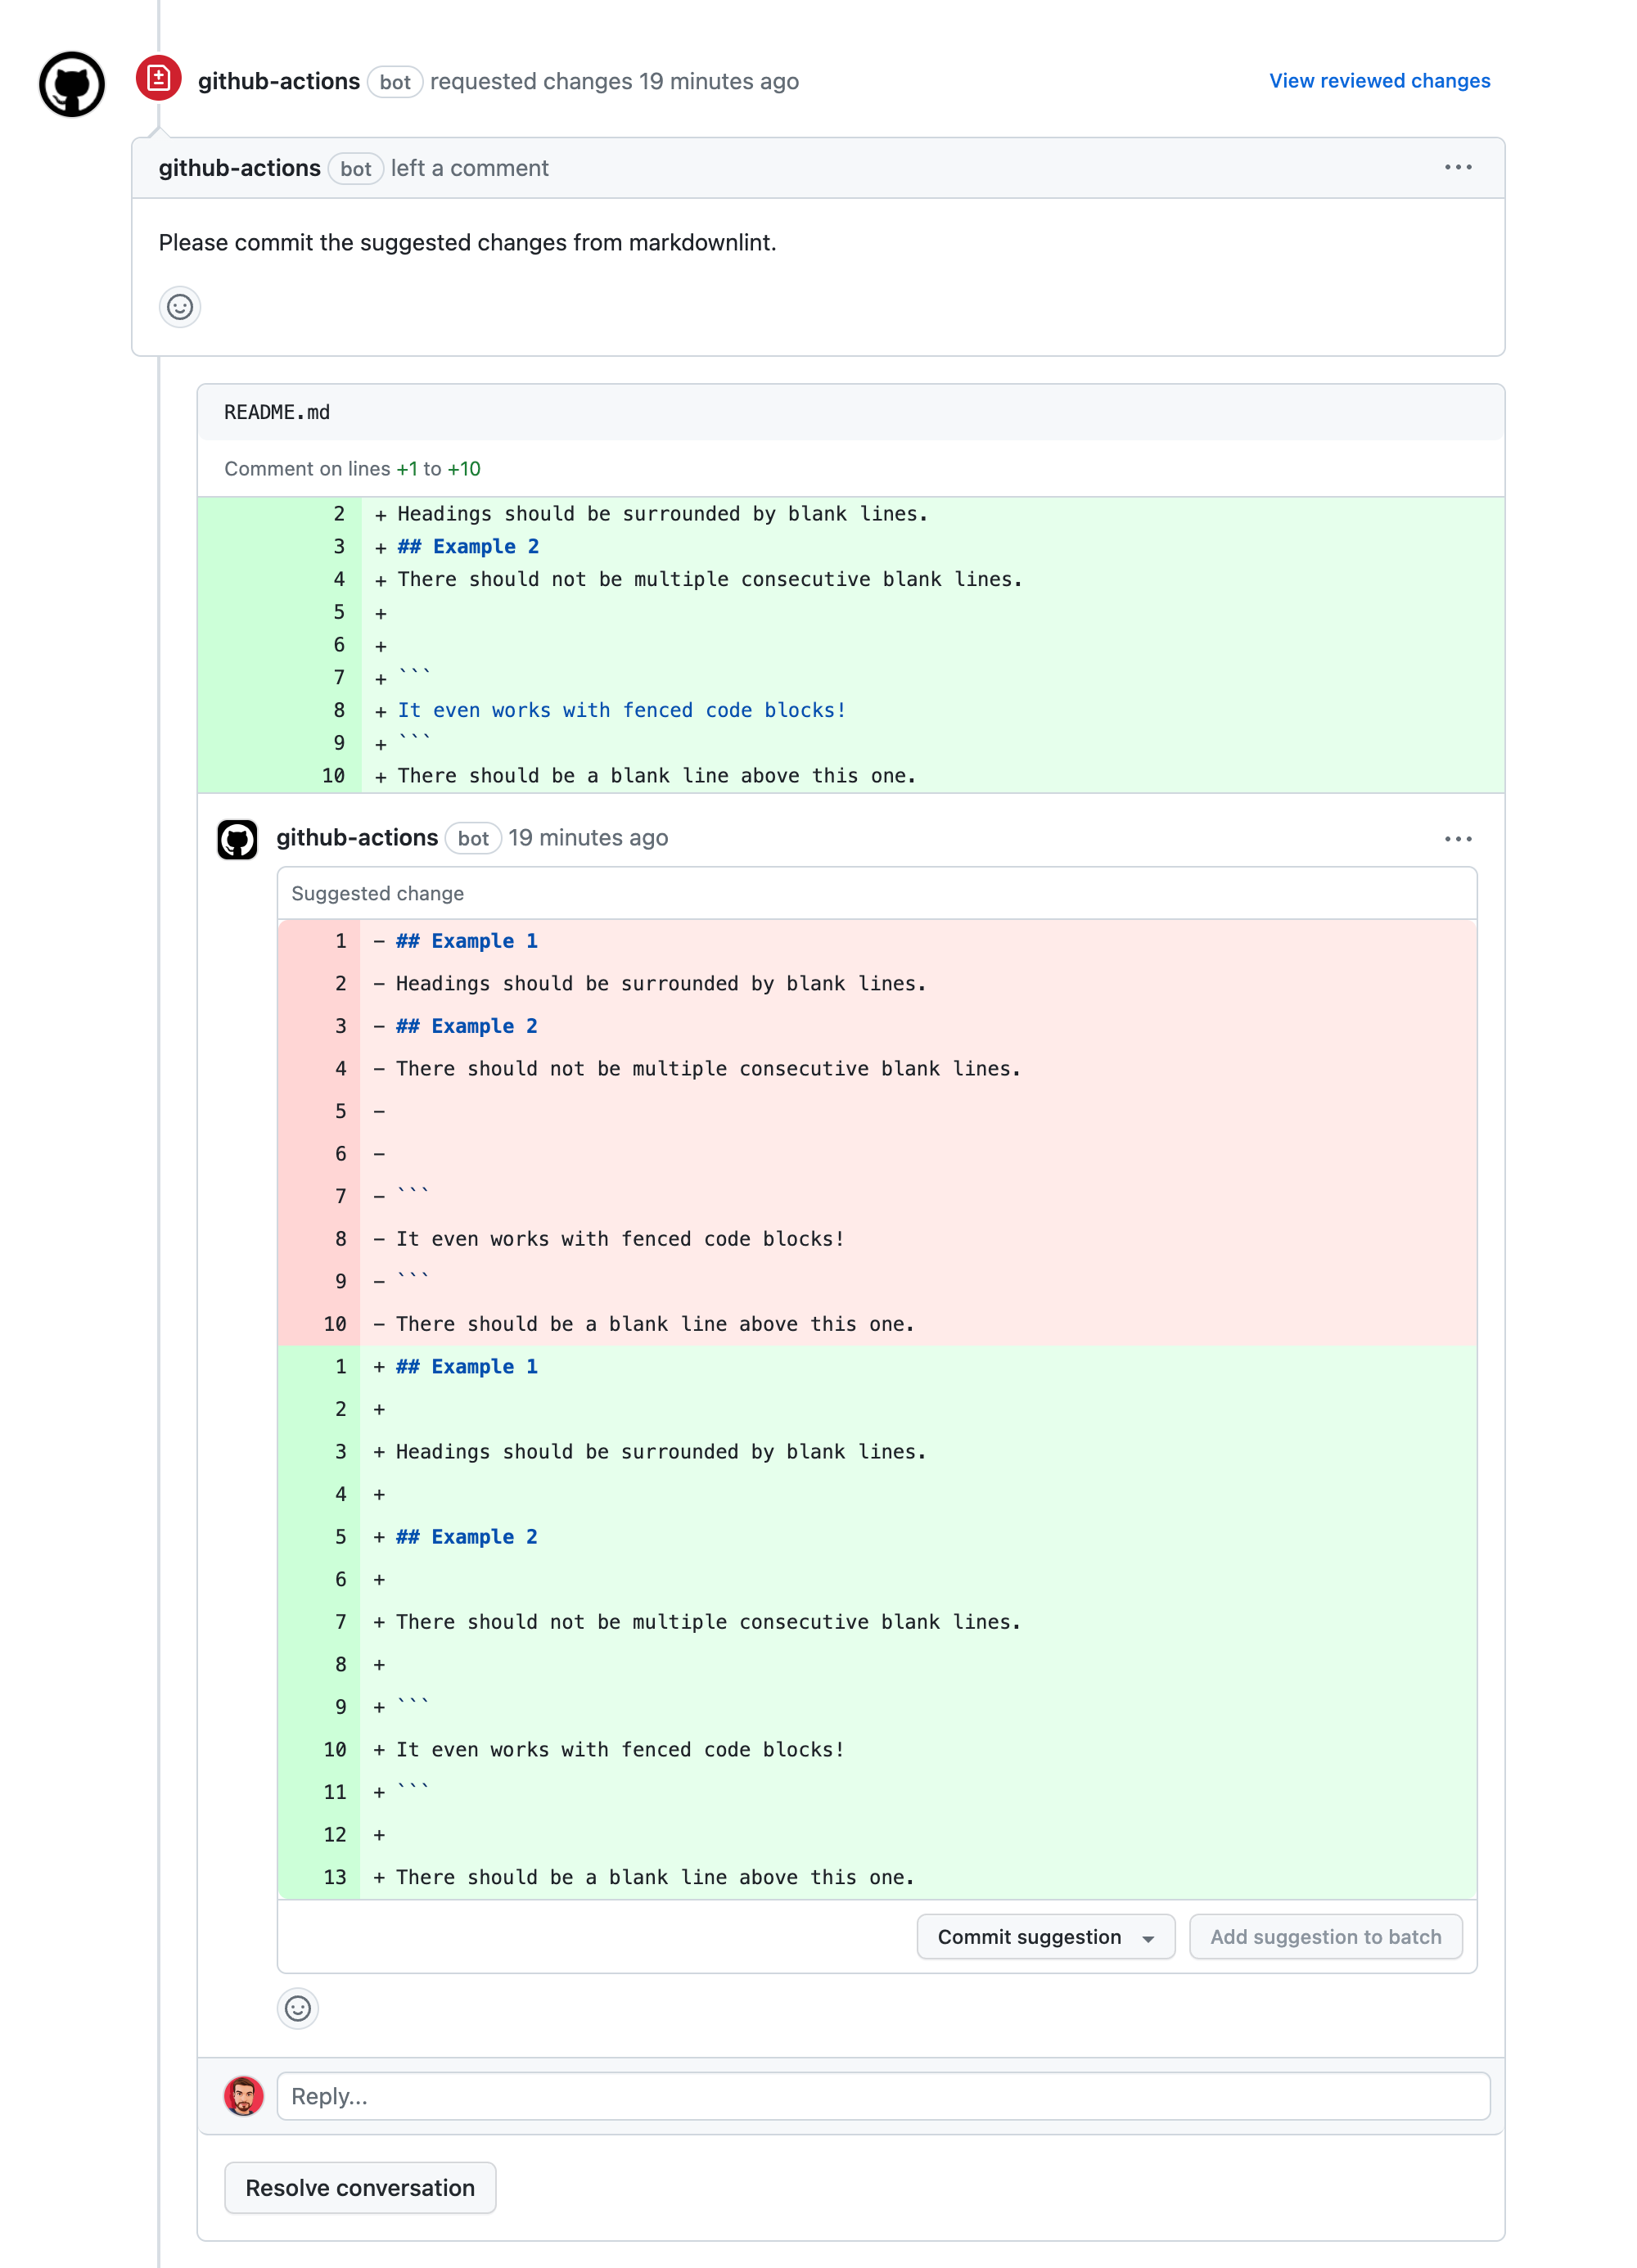 A screenshot showing an automated pull request review with suggested changes